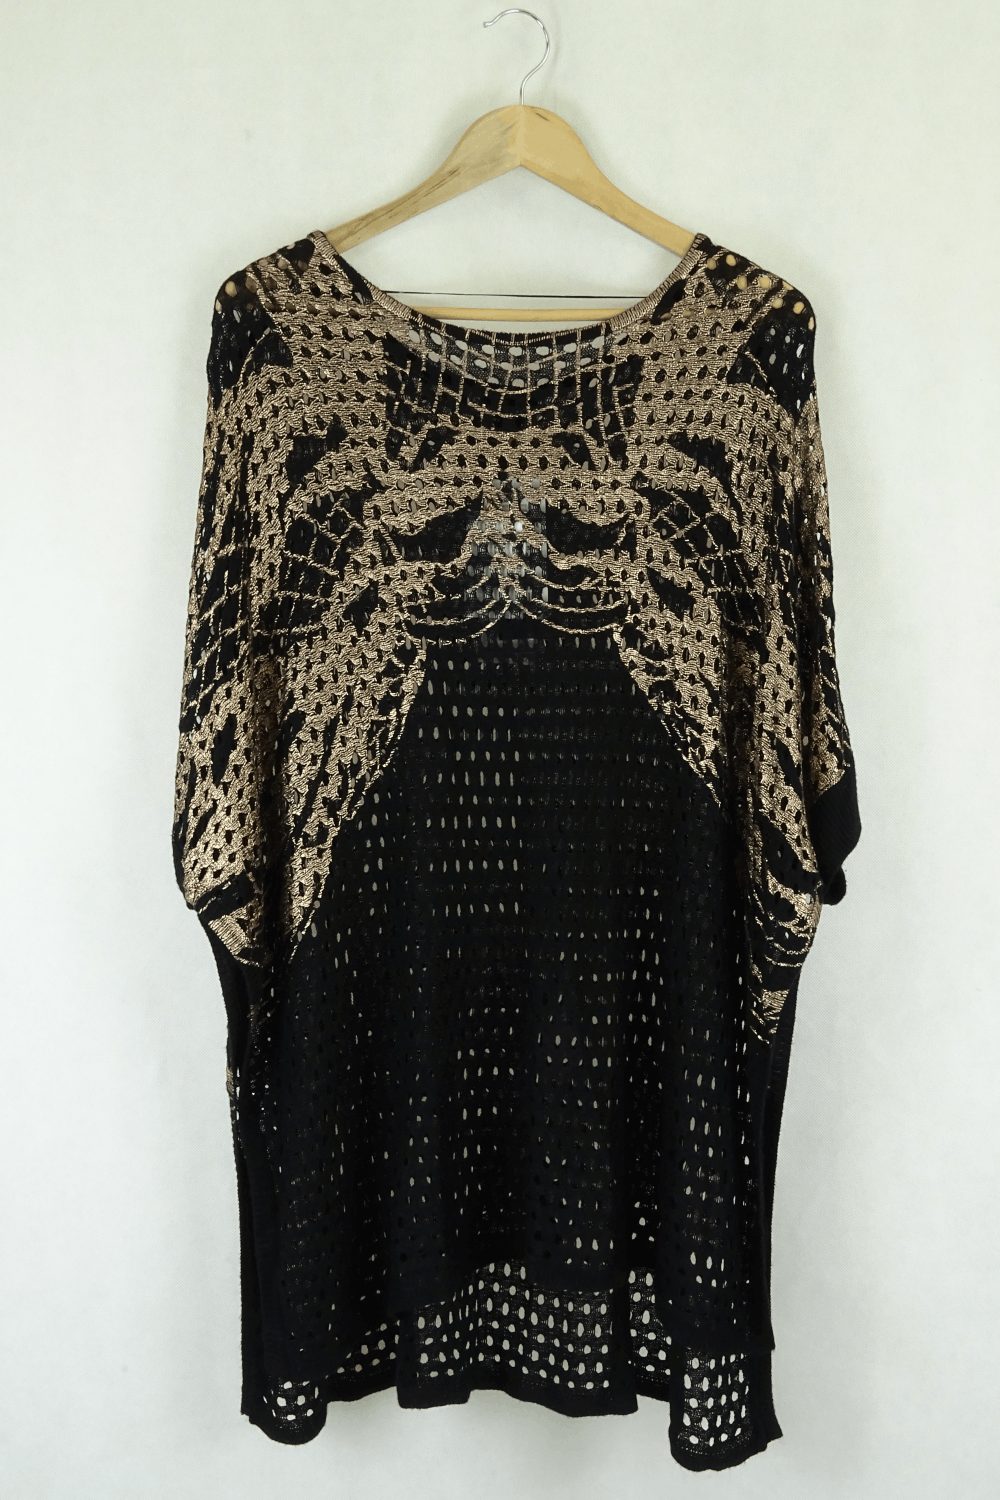 Taking Shape TS Black And Gold Knit Top 16